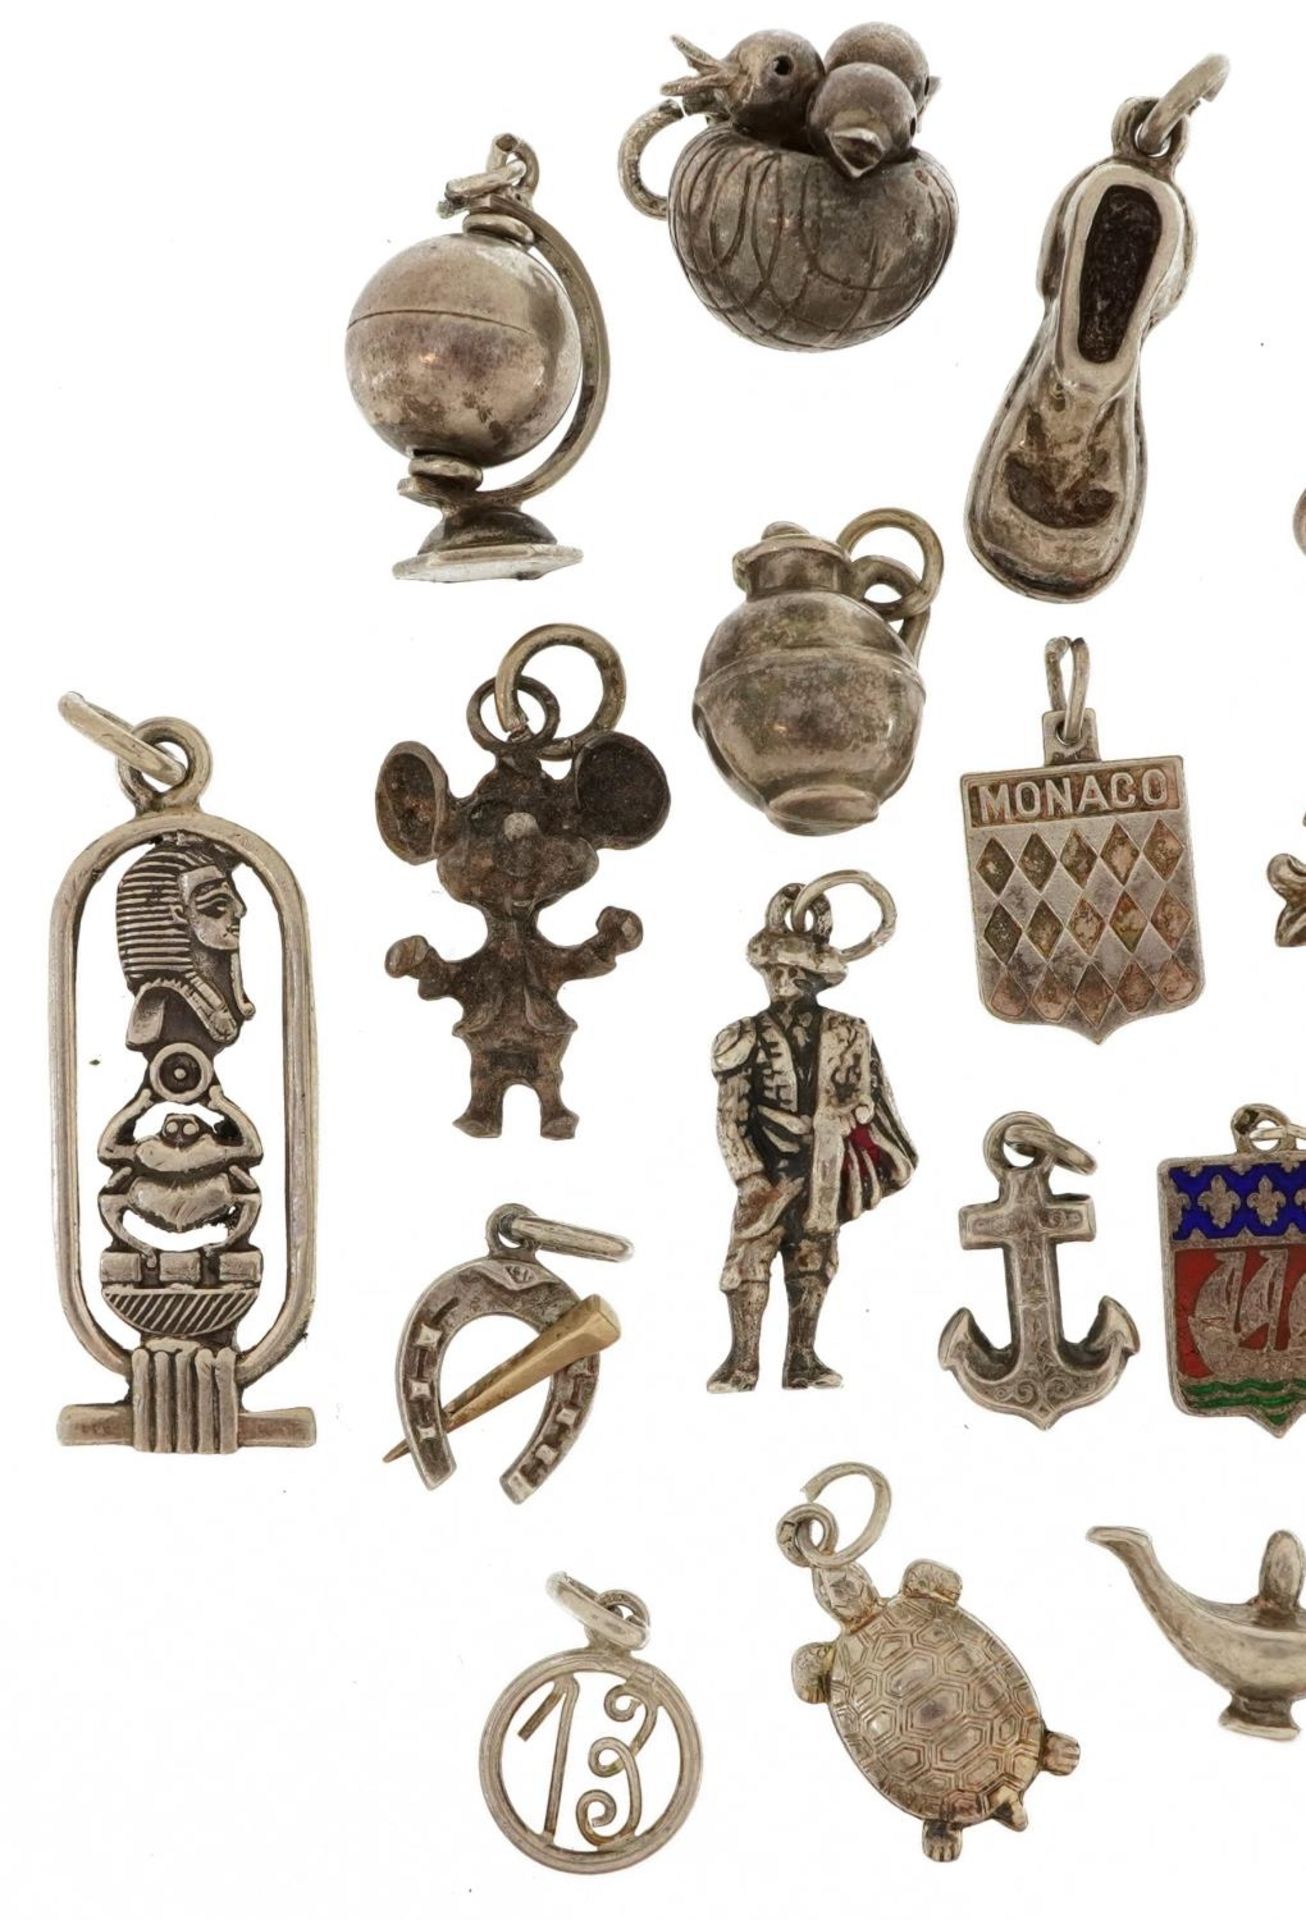 Silver and white metal charms including opening magnifying glass, fleur de lis, enamel bell and - Image 2 of 3